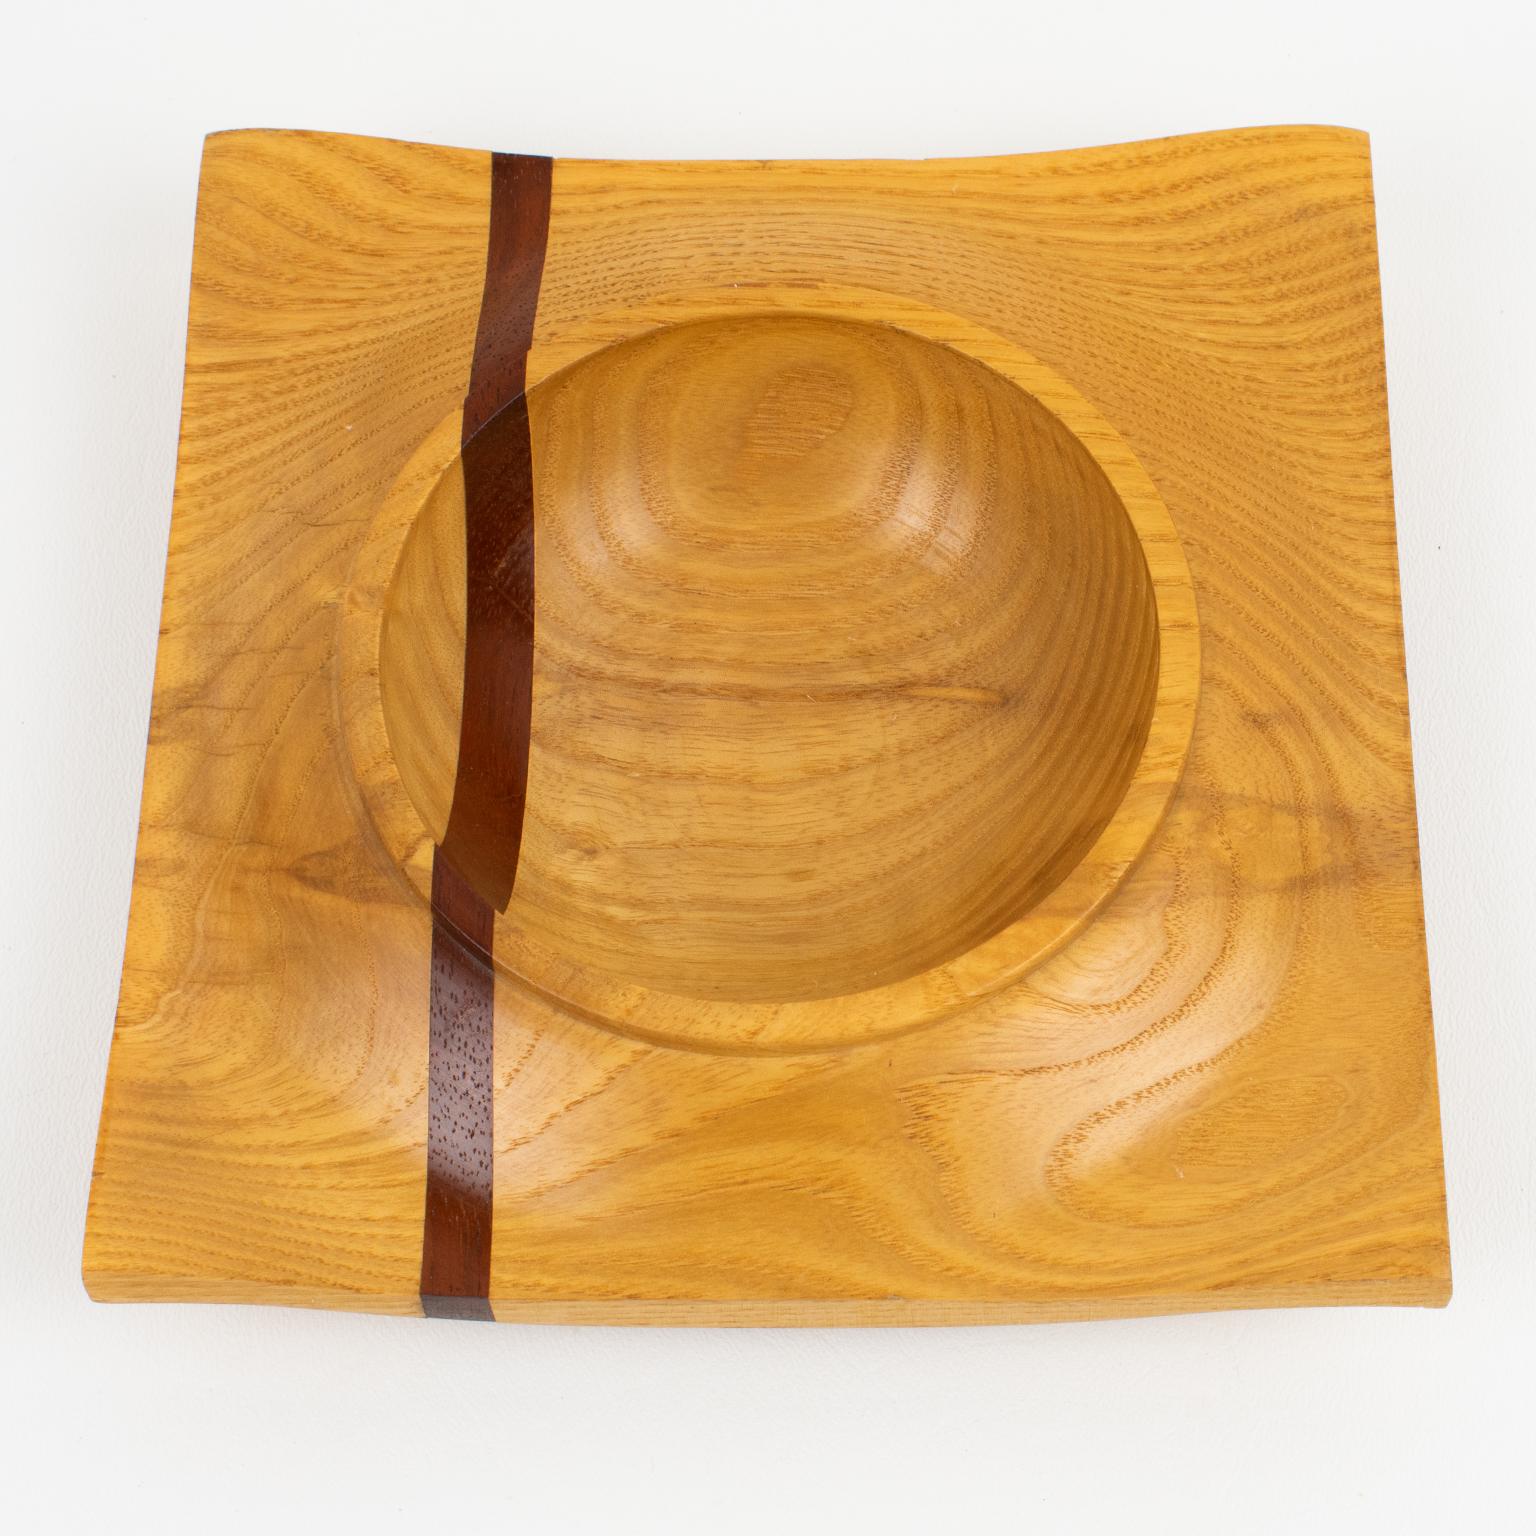 Late 20th Century Space Age Danish Carved Wood Bowl Centerpiece Catchall Vide Poche, 1980s For Sale